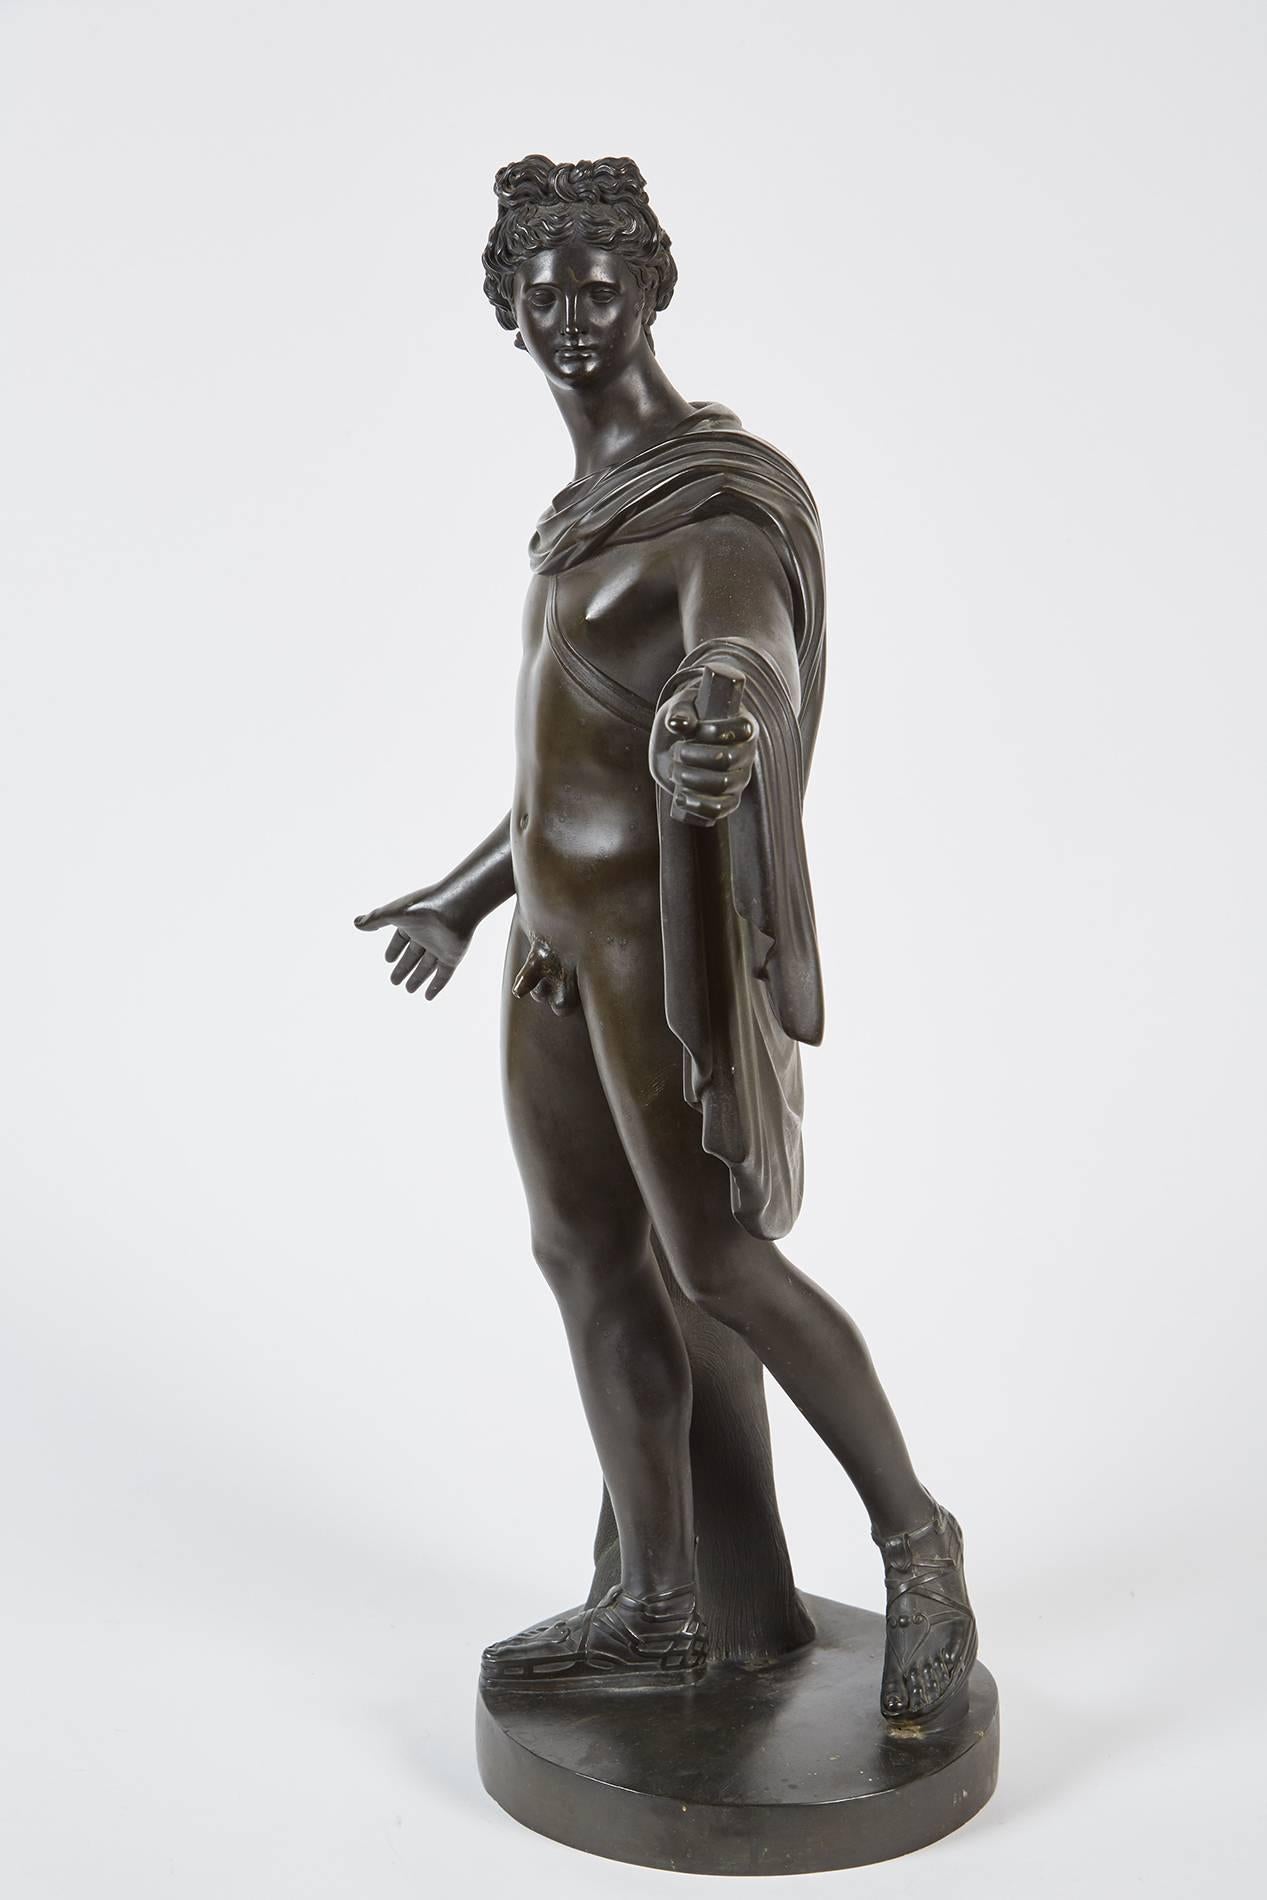 A late 19th century French bronze sculpture of Apollo Belvedere featuring a detailed garment draping over his shoulders and left arm. The figure seems to be holding an object while looking off to the left by a log with beautifully carved foliage.